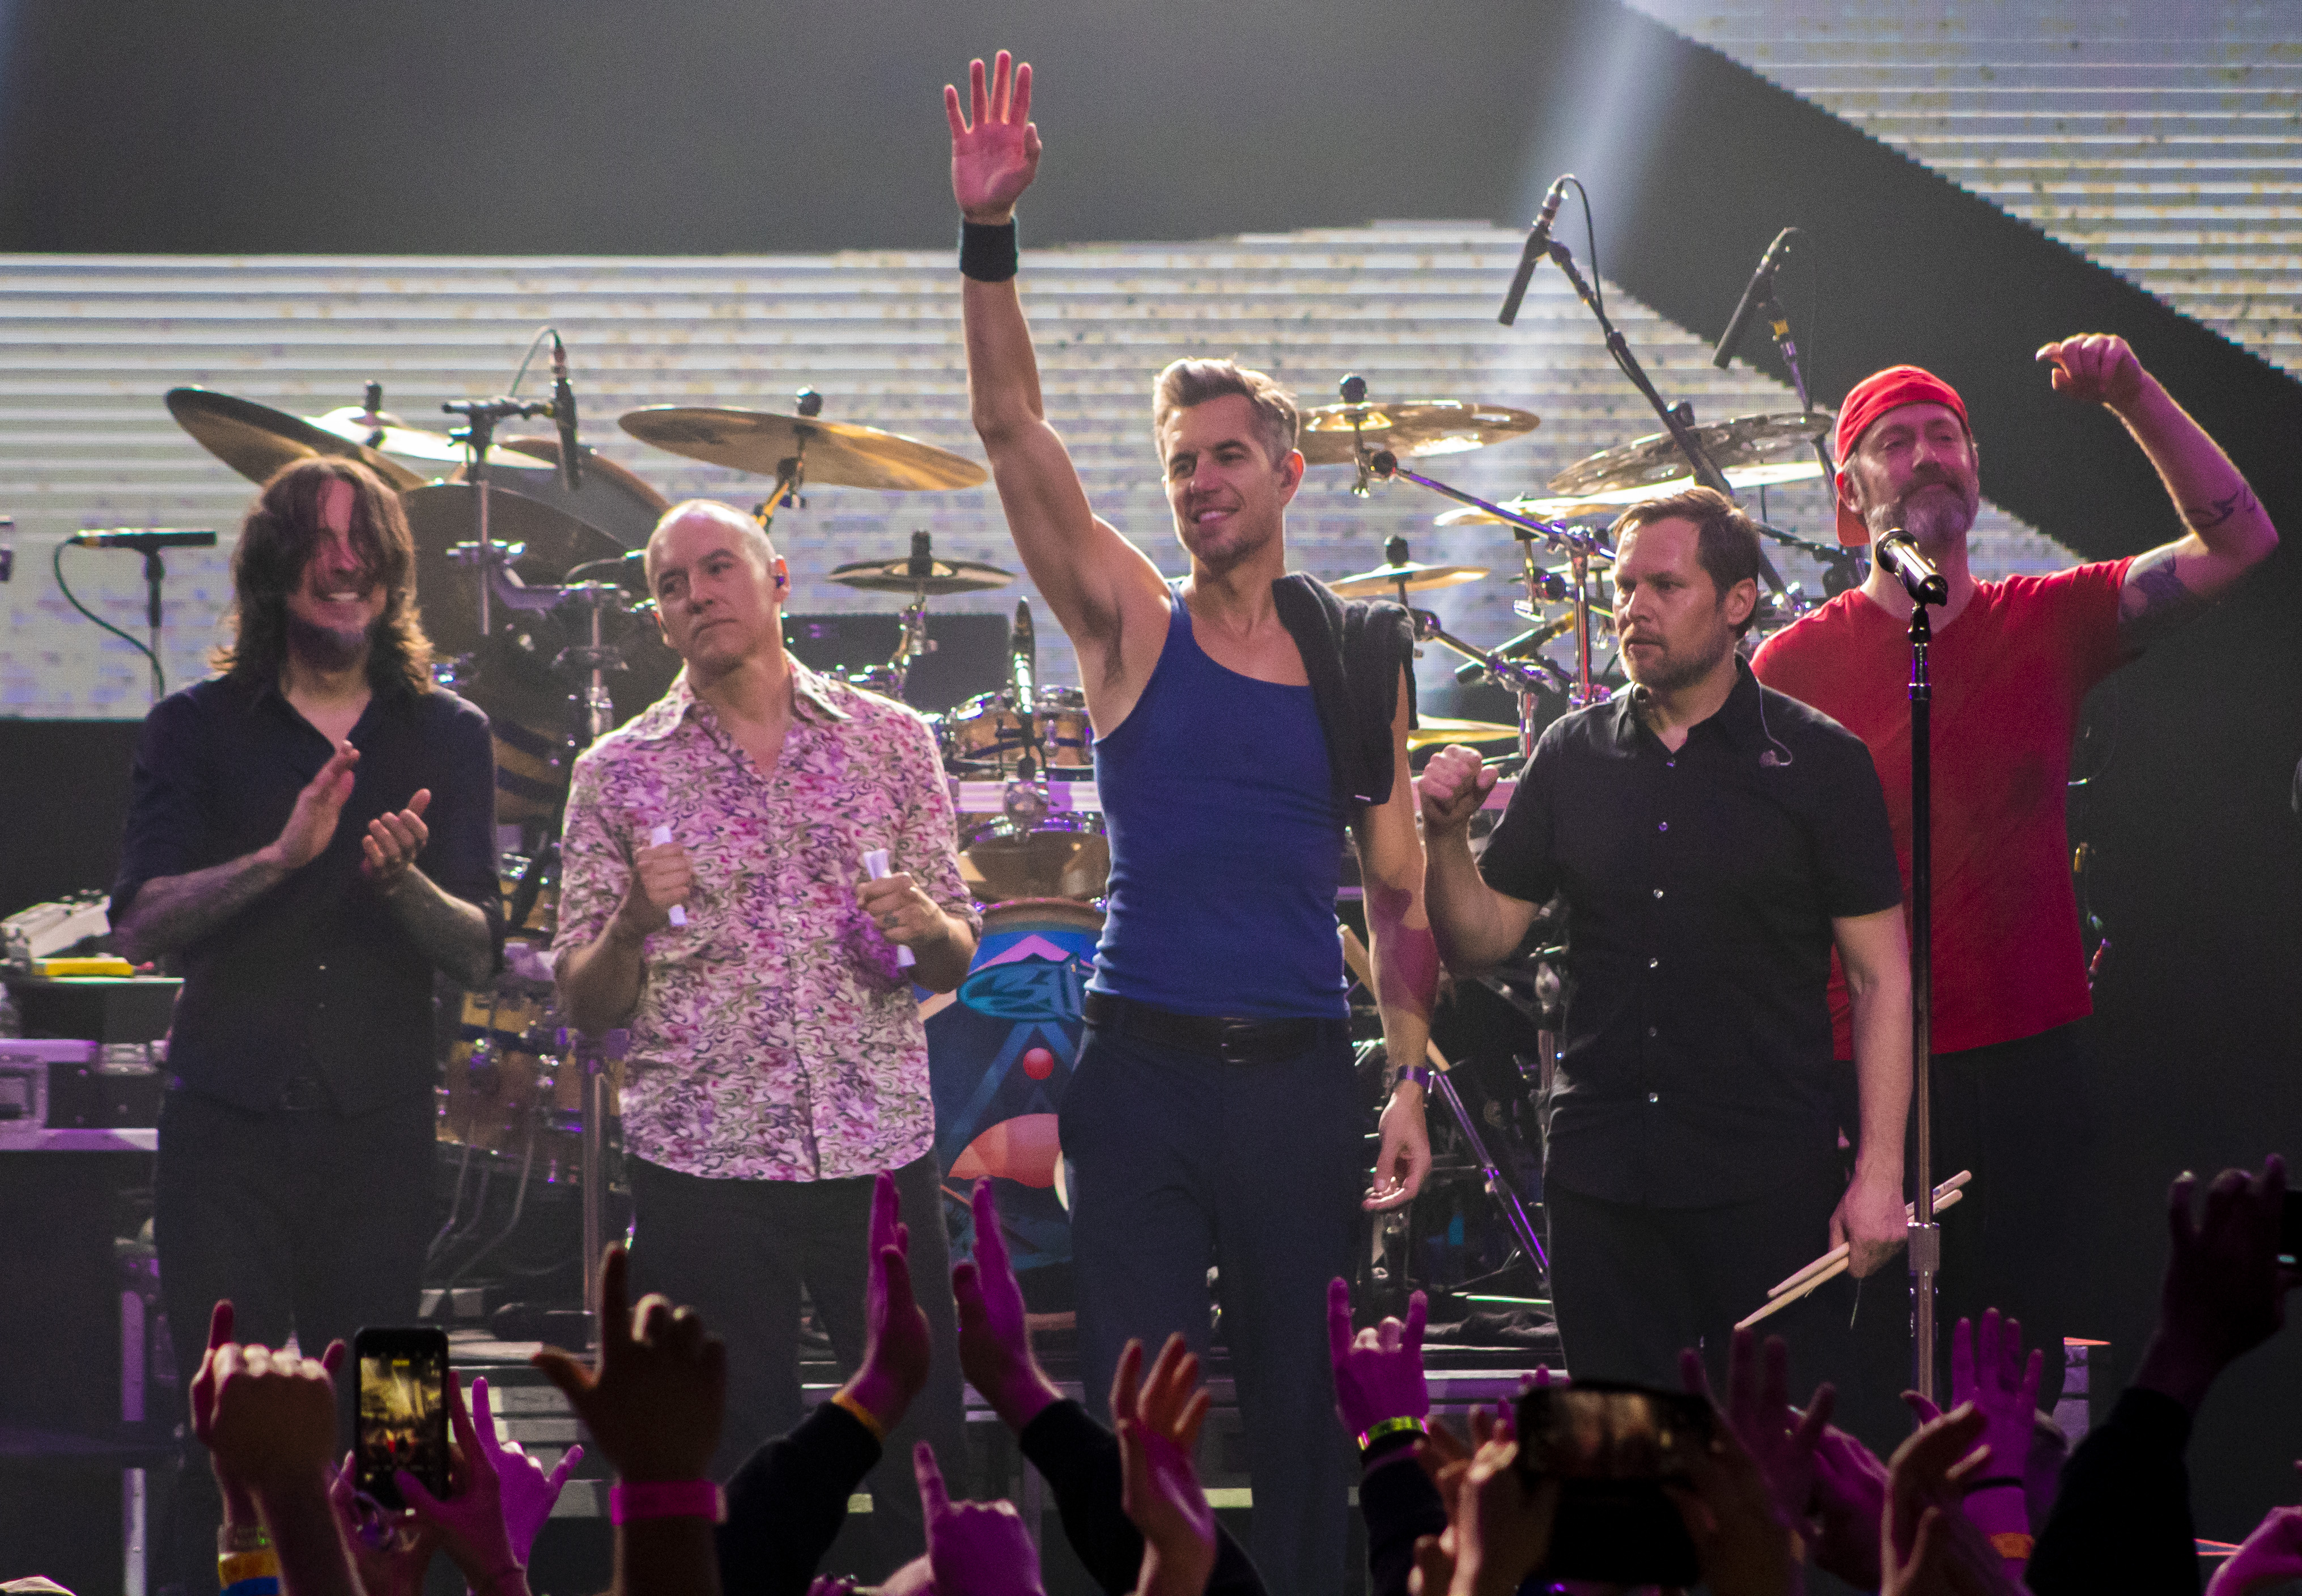 311 Look Back at Their 30 Years as a Band